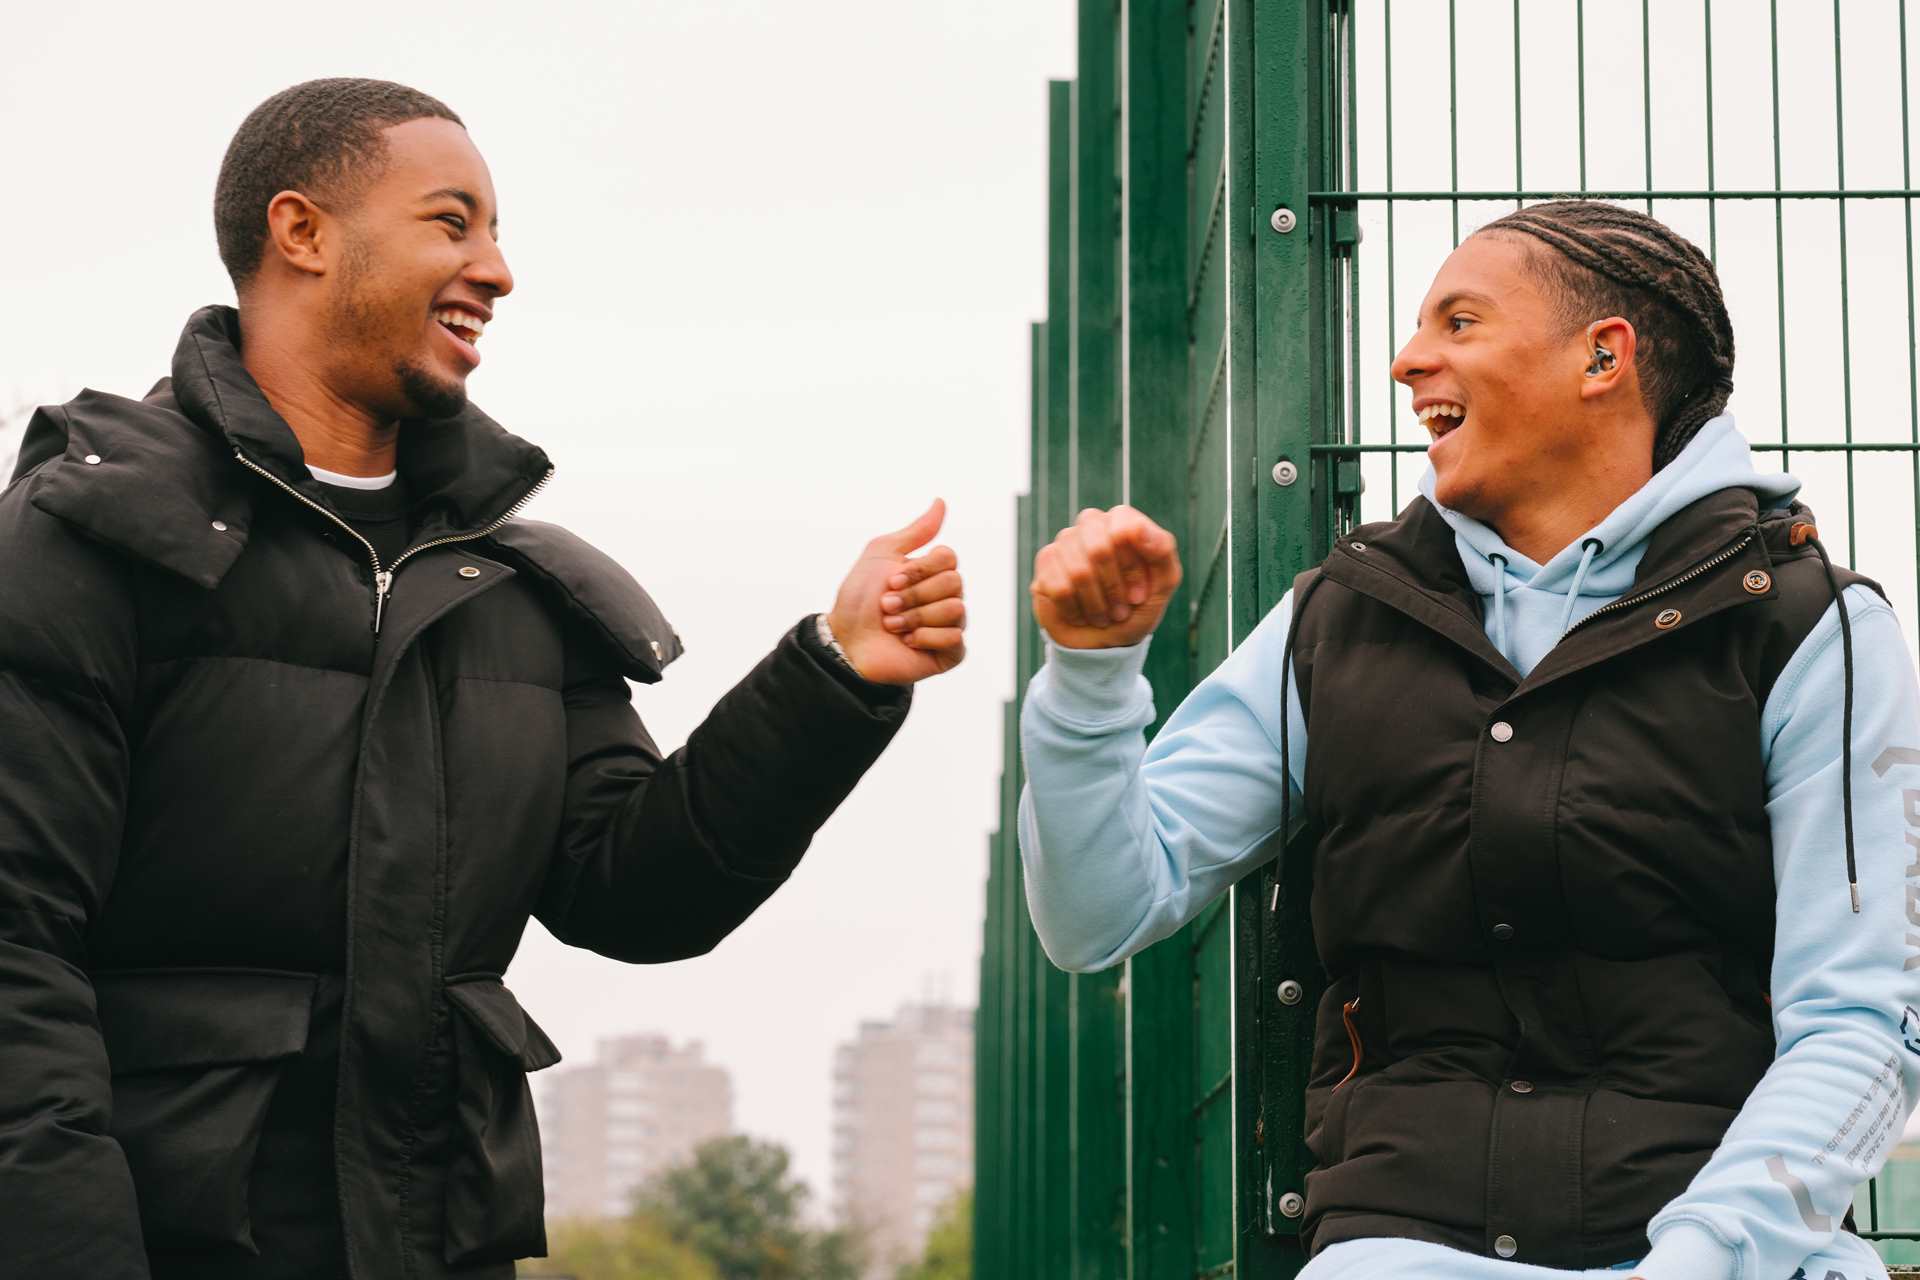 A Black teenage boy wearing a hearing aid bumping fists with a young Black man in the park.